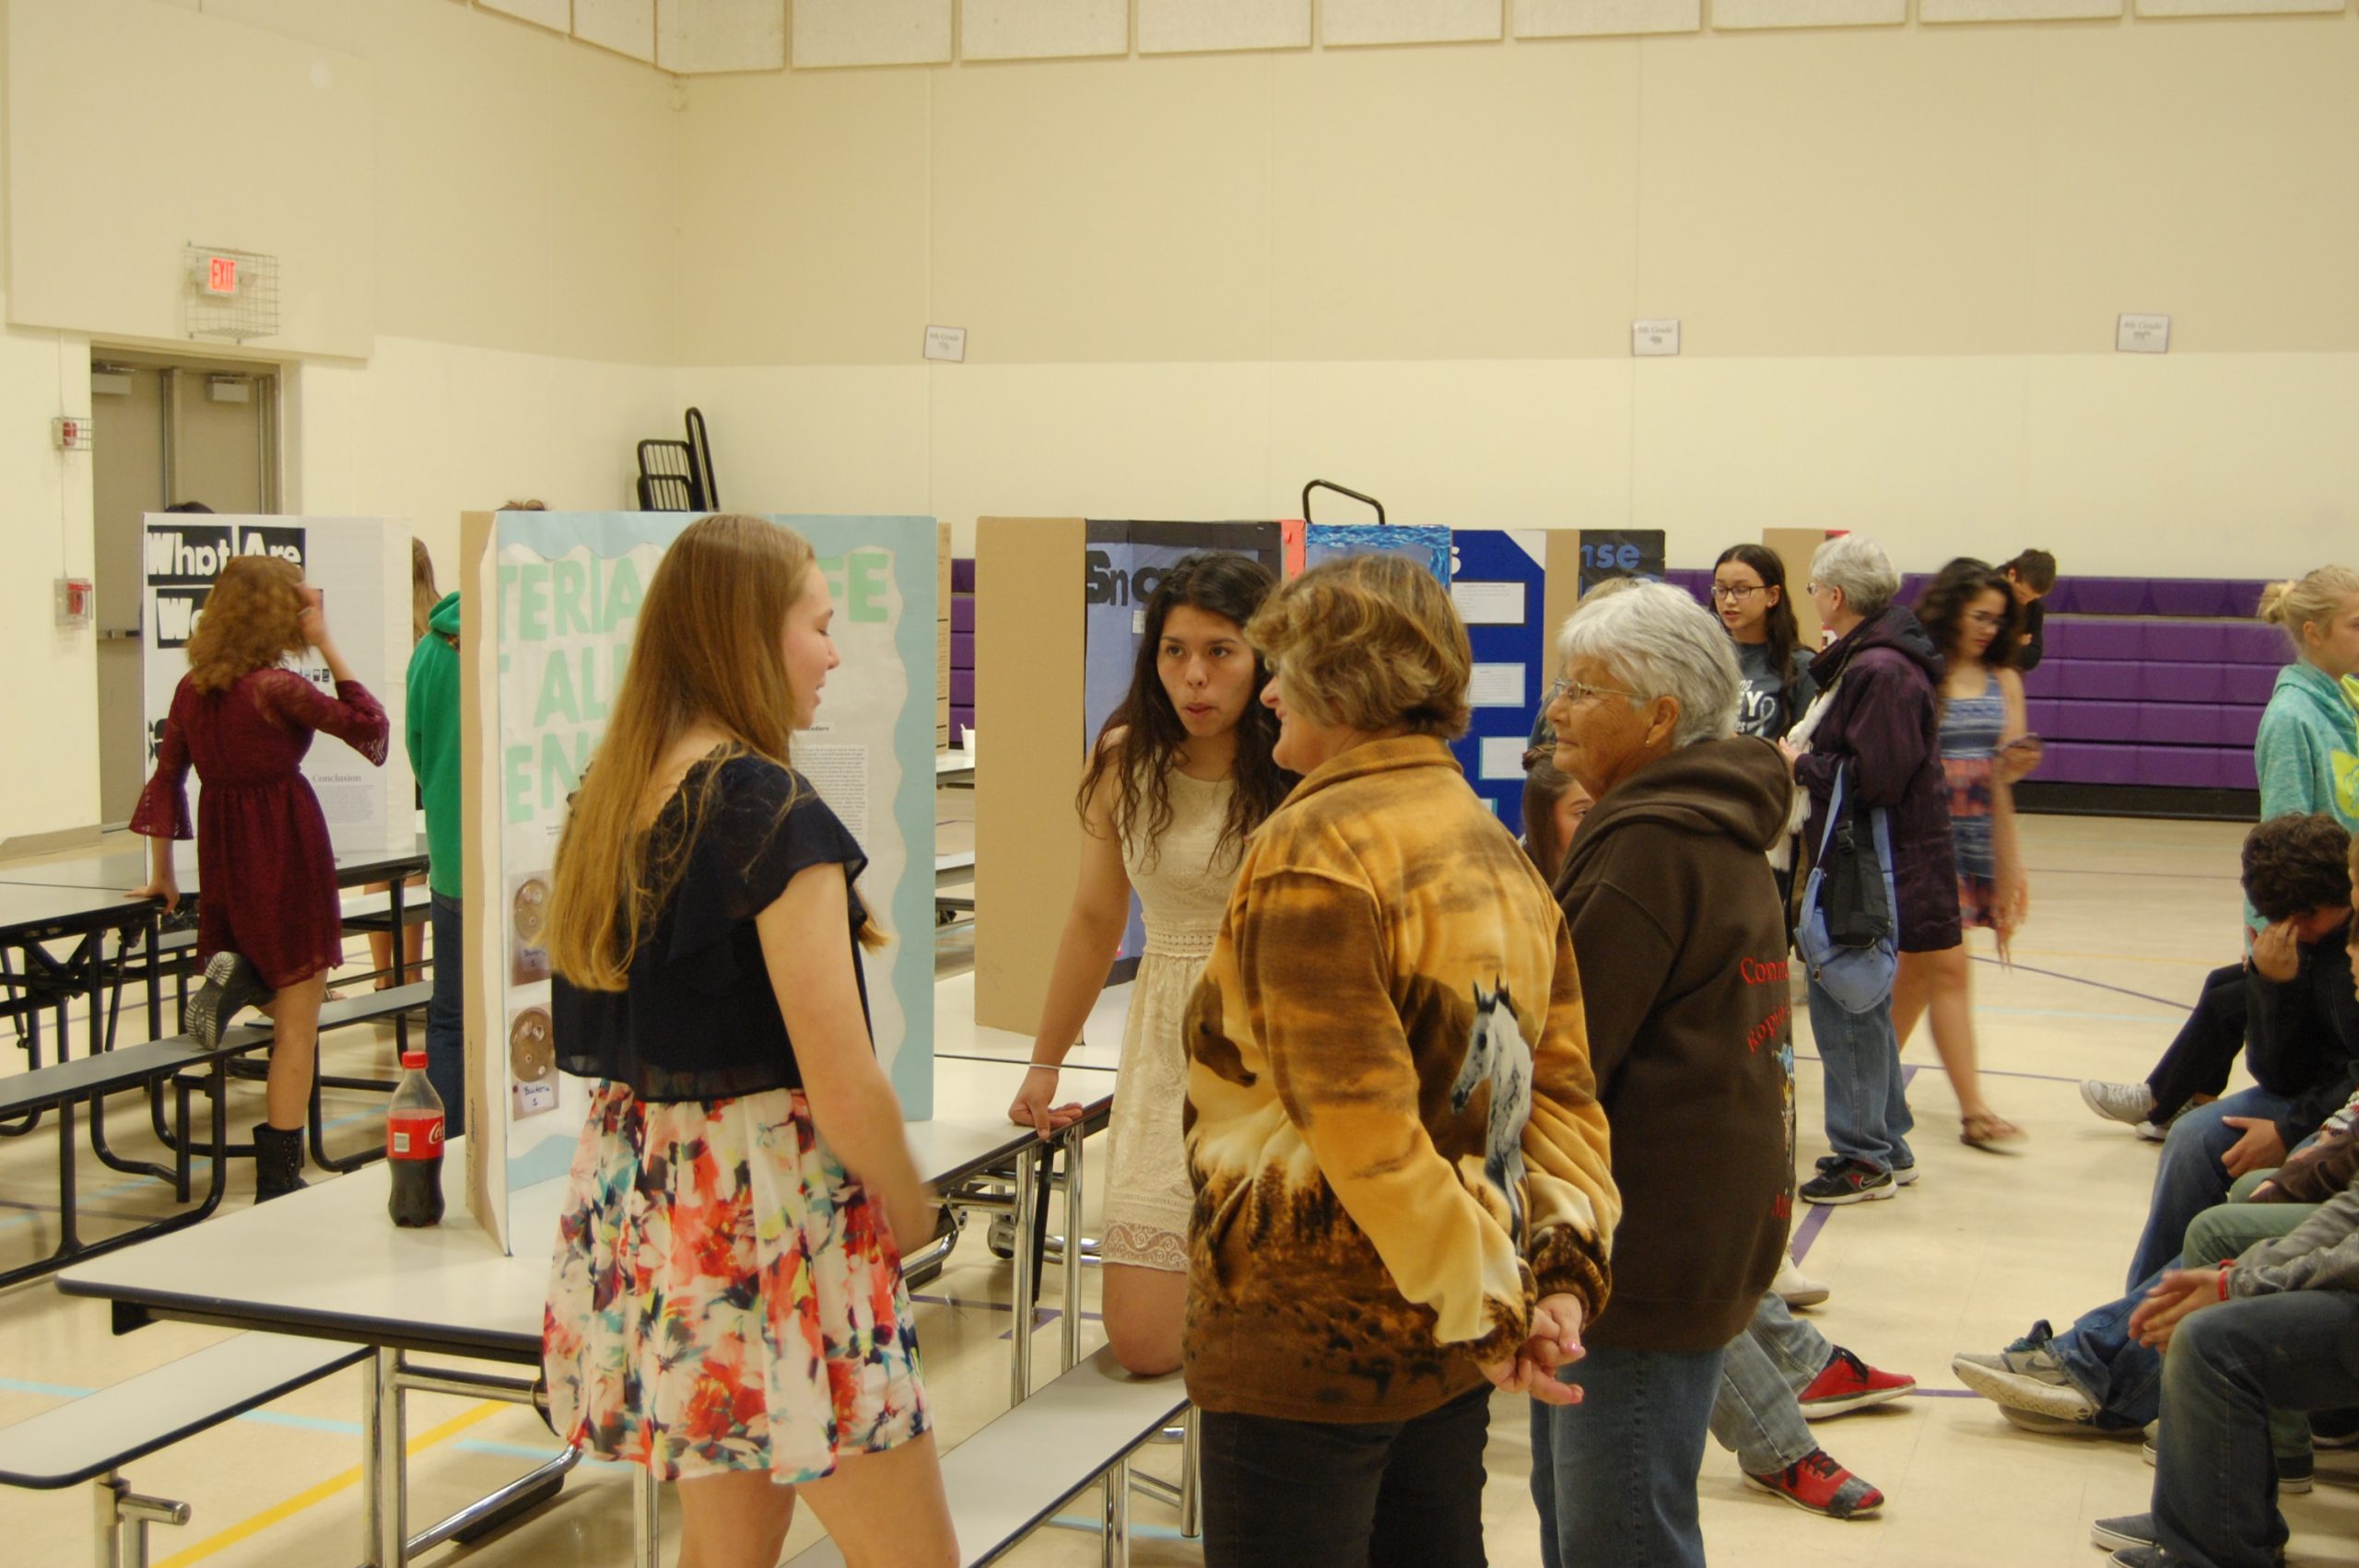 South Dakota’s First Annual Southwestern Counties Science Fair